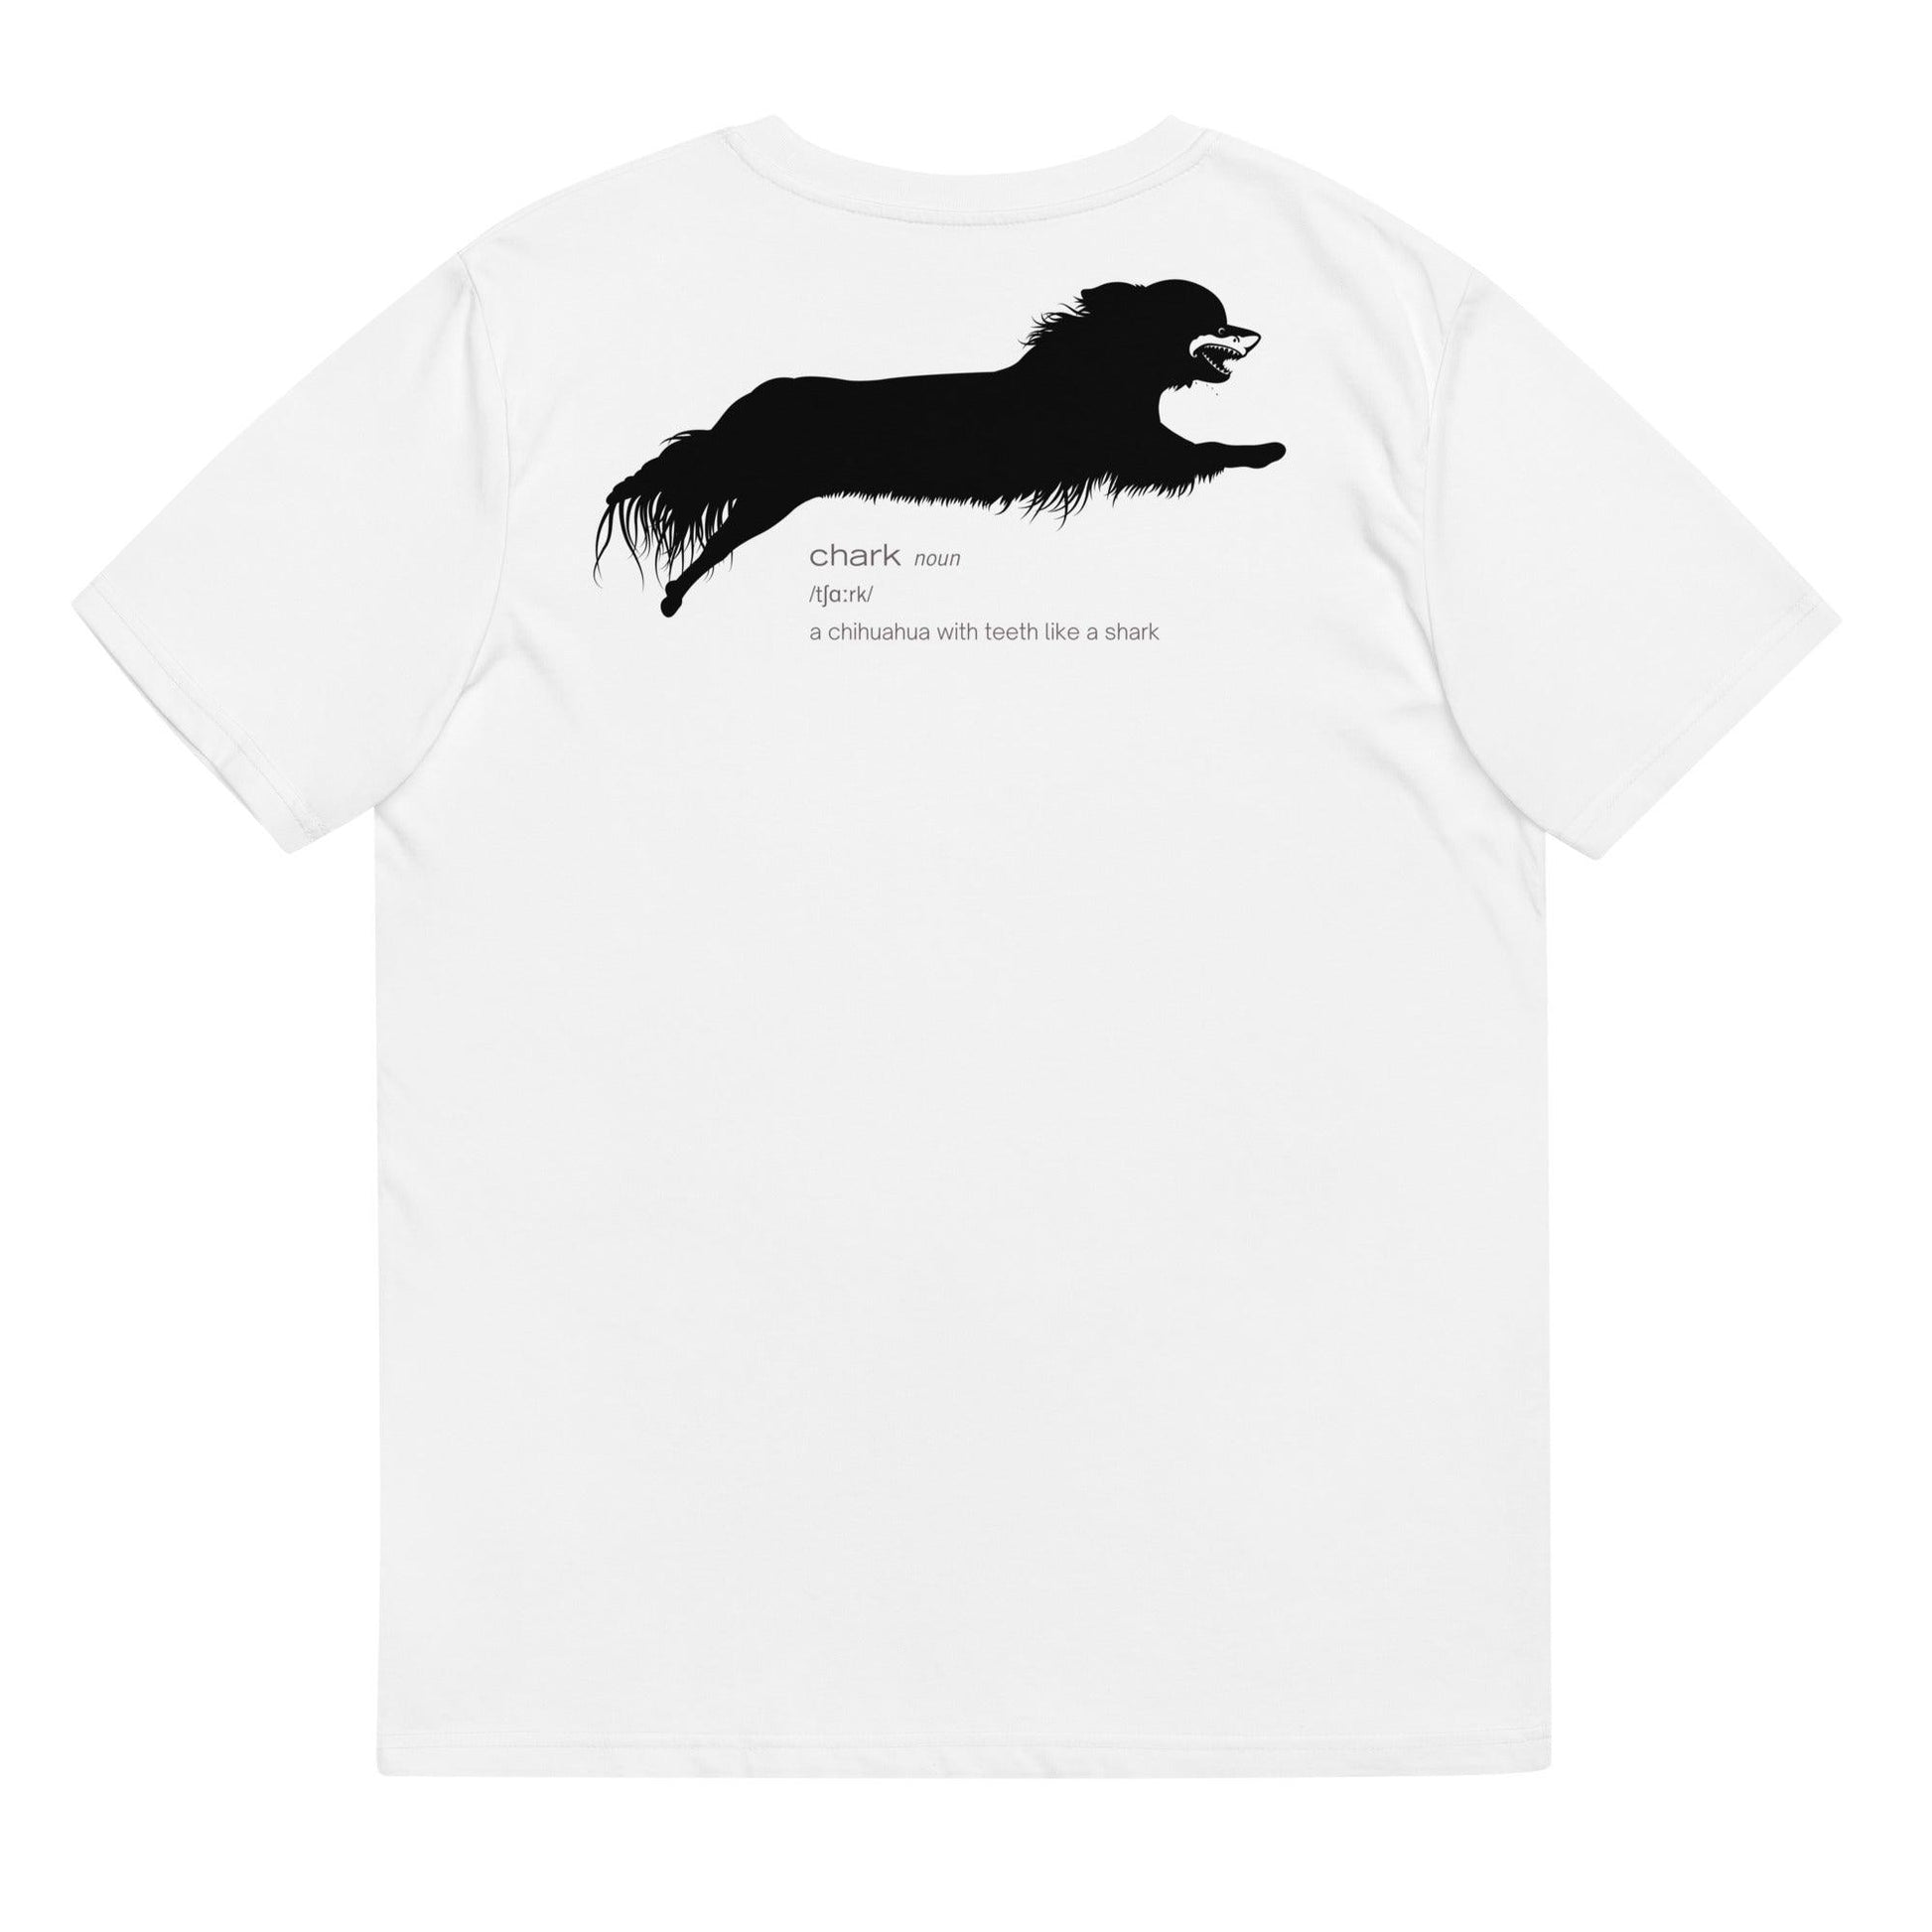 Chihuahua + Shark = Chark unisex t-shirt. Front: black silhouette of a longhaired chihuahua with the face of a great white shark + "Chark"  in cursive font. Back: another shark-faced chihuahua silhouette running across the shoulder blades + dictionary entry of the noun "chark": a chihuahua with teeth like a shark. 100% pure organic cotton. White. Unisex in sizes for men and women. Design by Renate Kriegler, owner of Chimigos - for the love of chihuahuas. More on chimigos.com